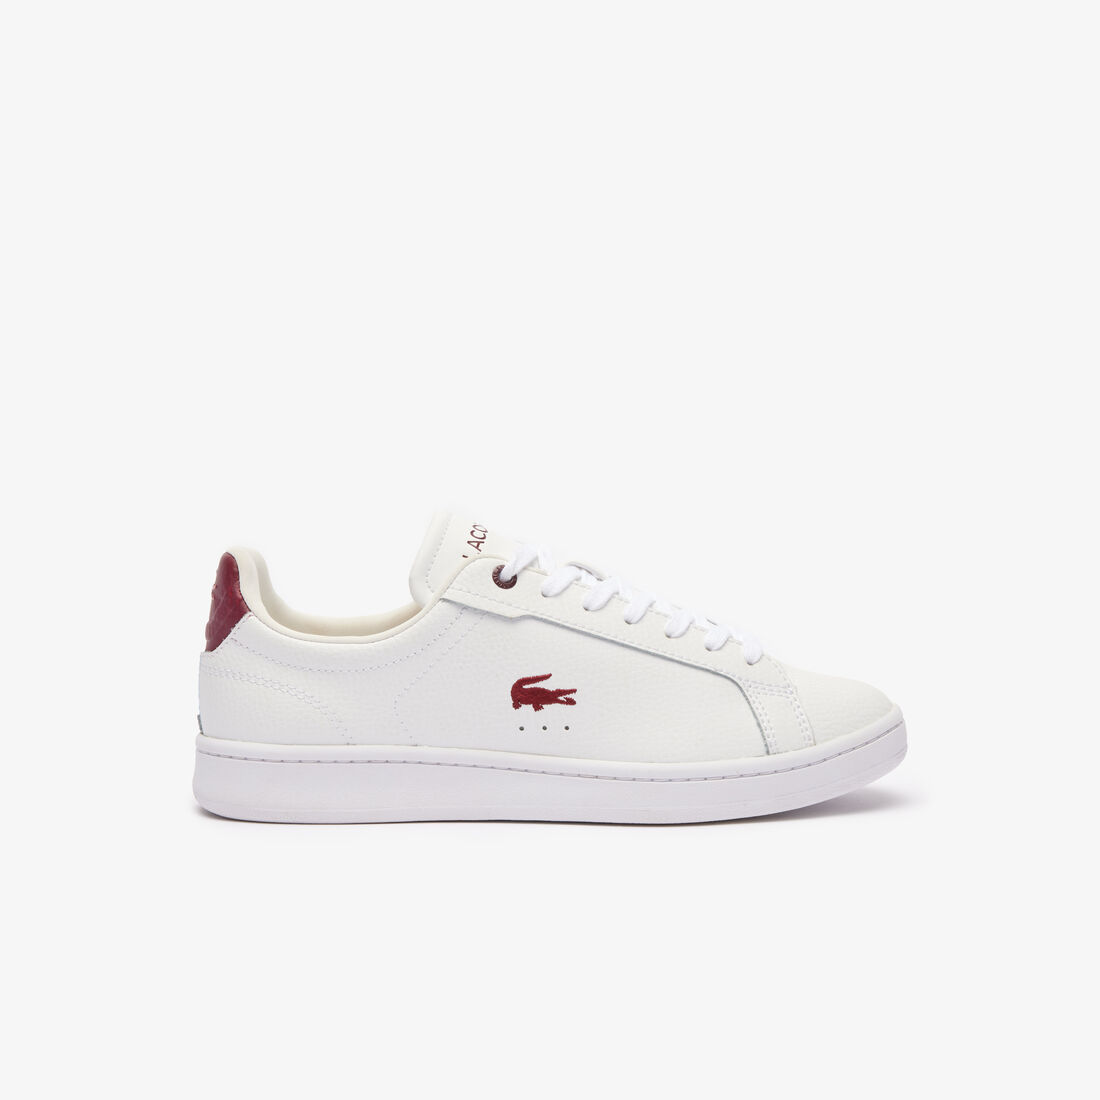 Women's Carnaby Pro Leather Trainers   - 47SFA0043-2G1